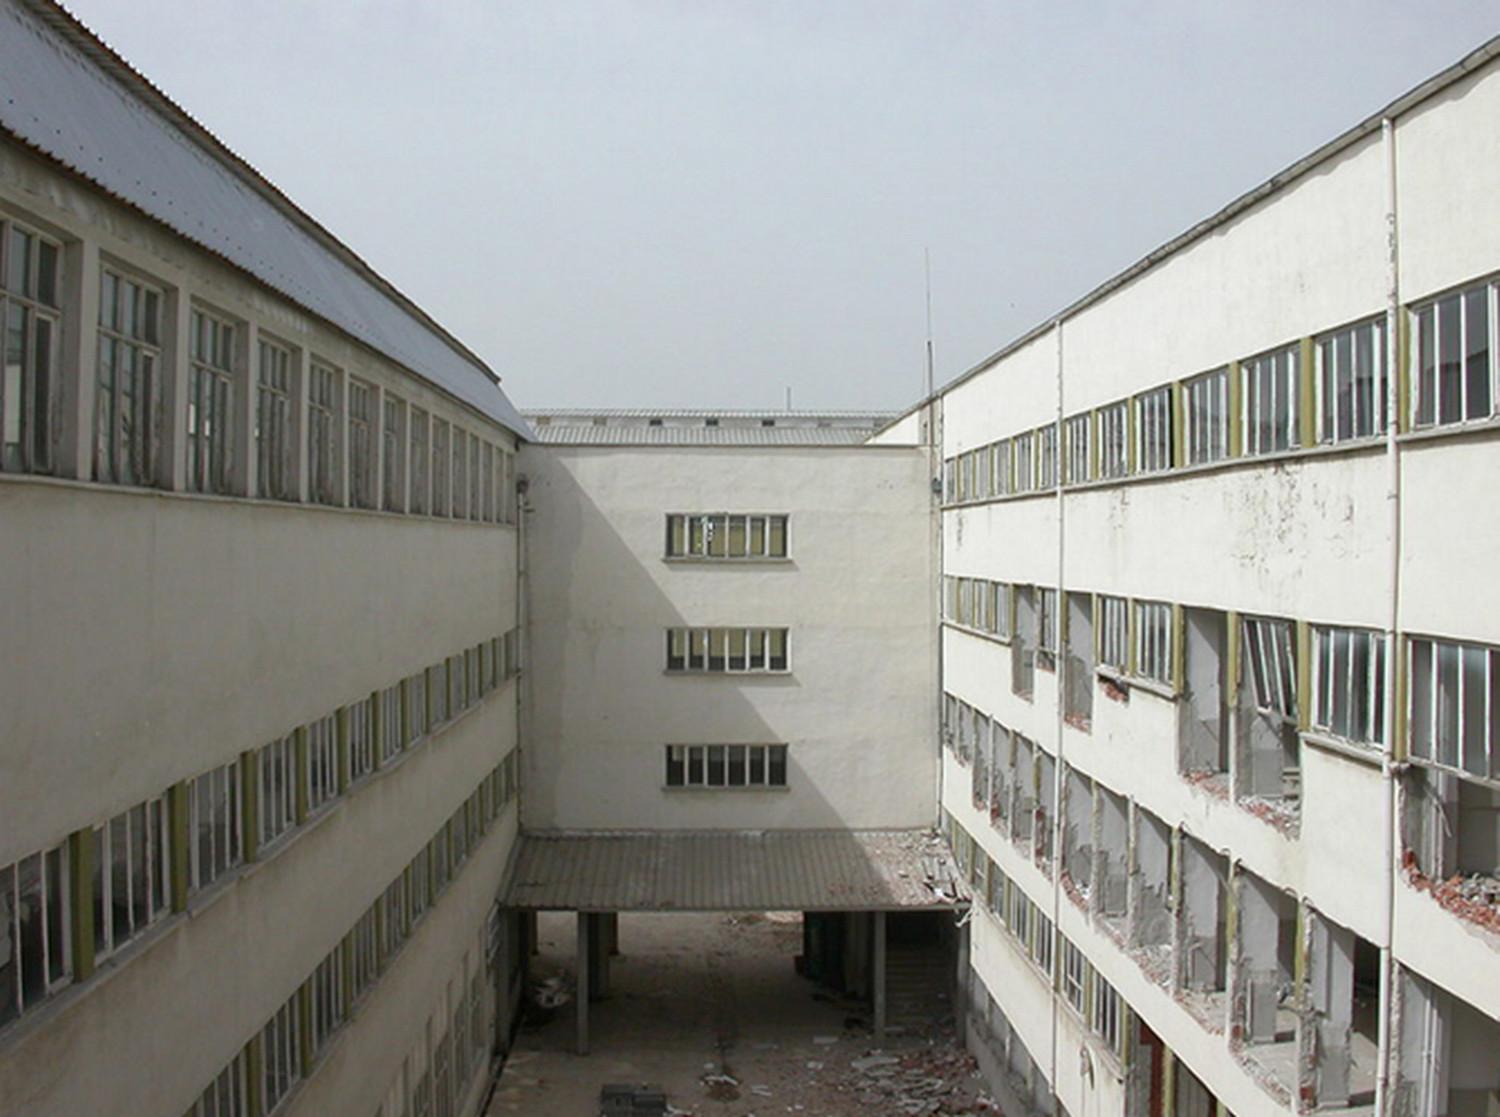 Old view of the courtyard, University building